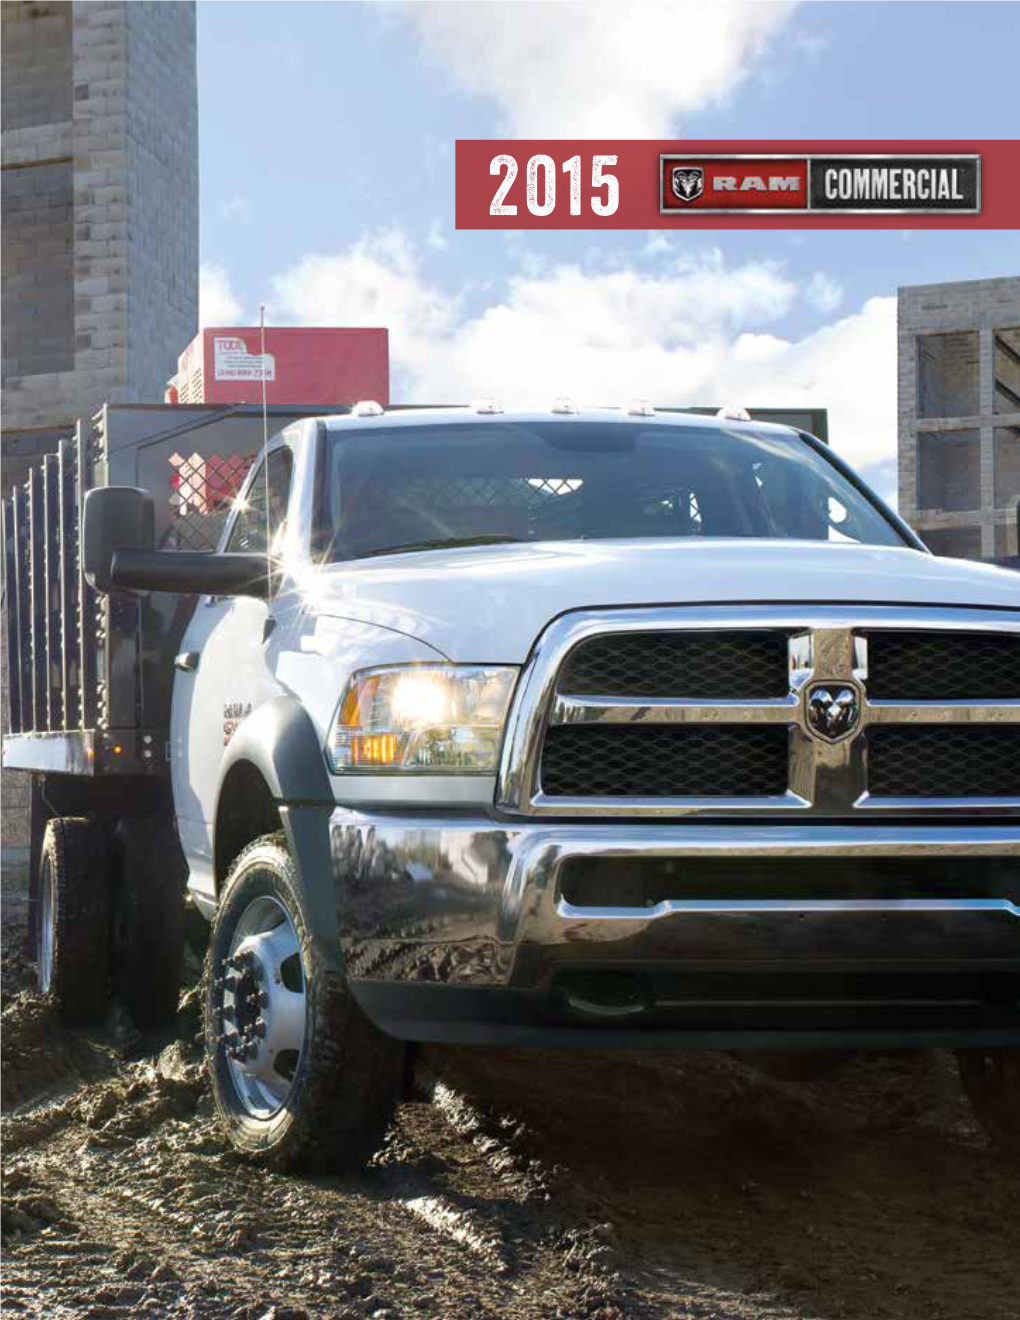 2015 Ram Trucks Are All About Keeping in Touch